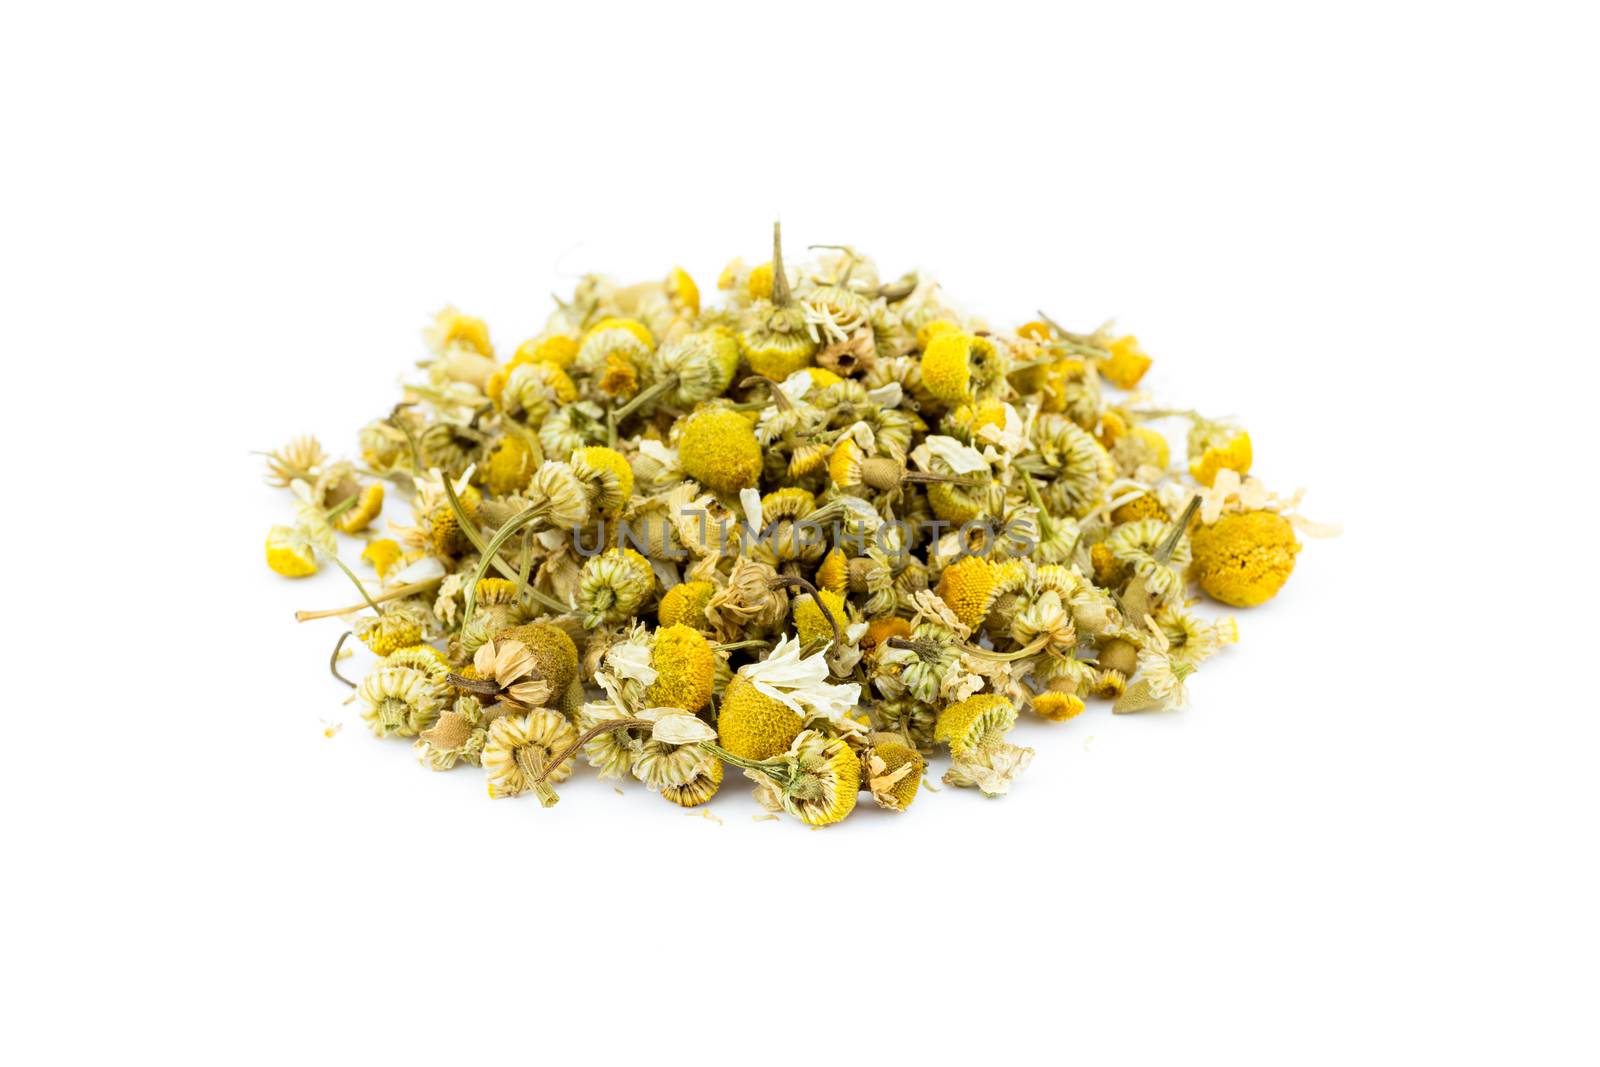 Loose camomile tea on white by BenSchonewille